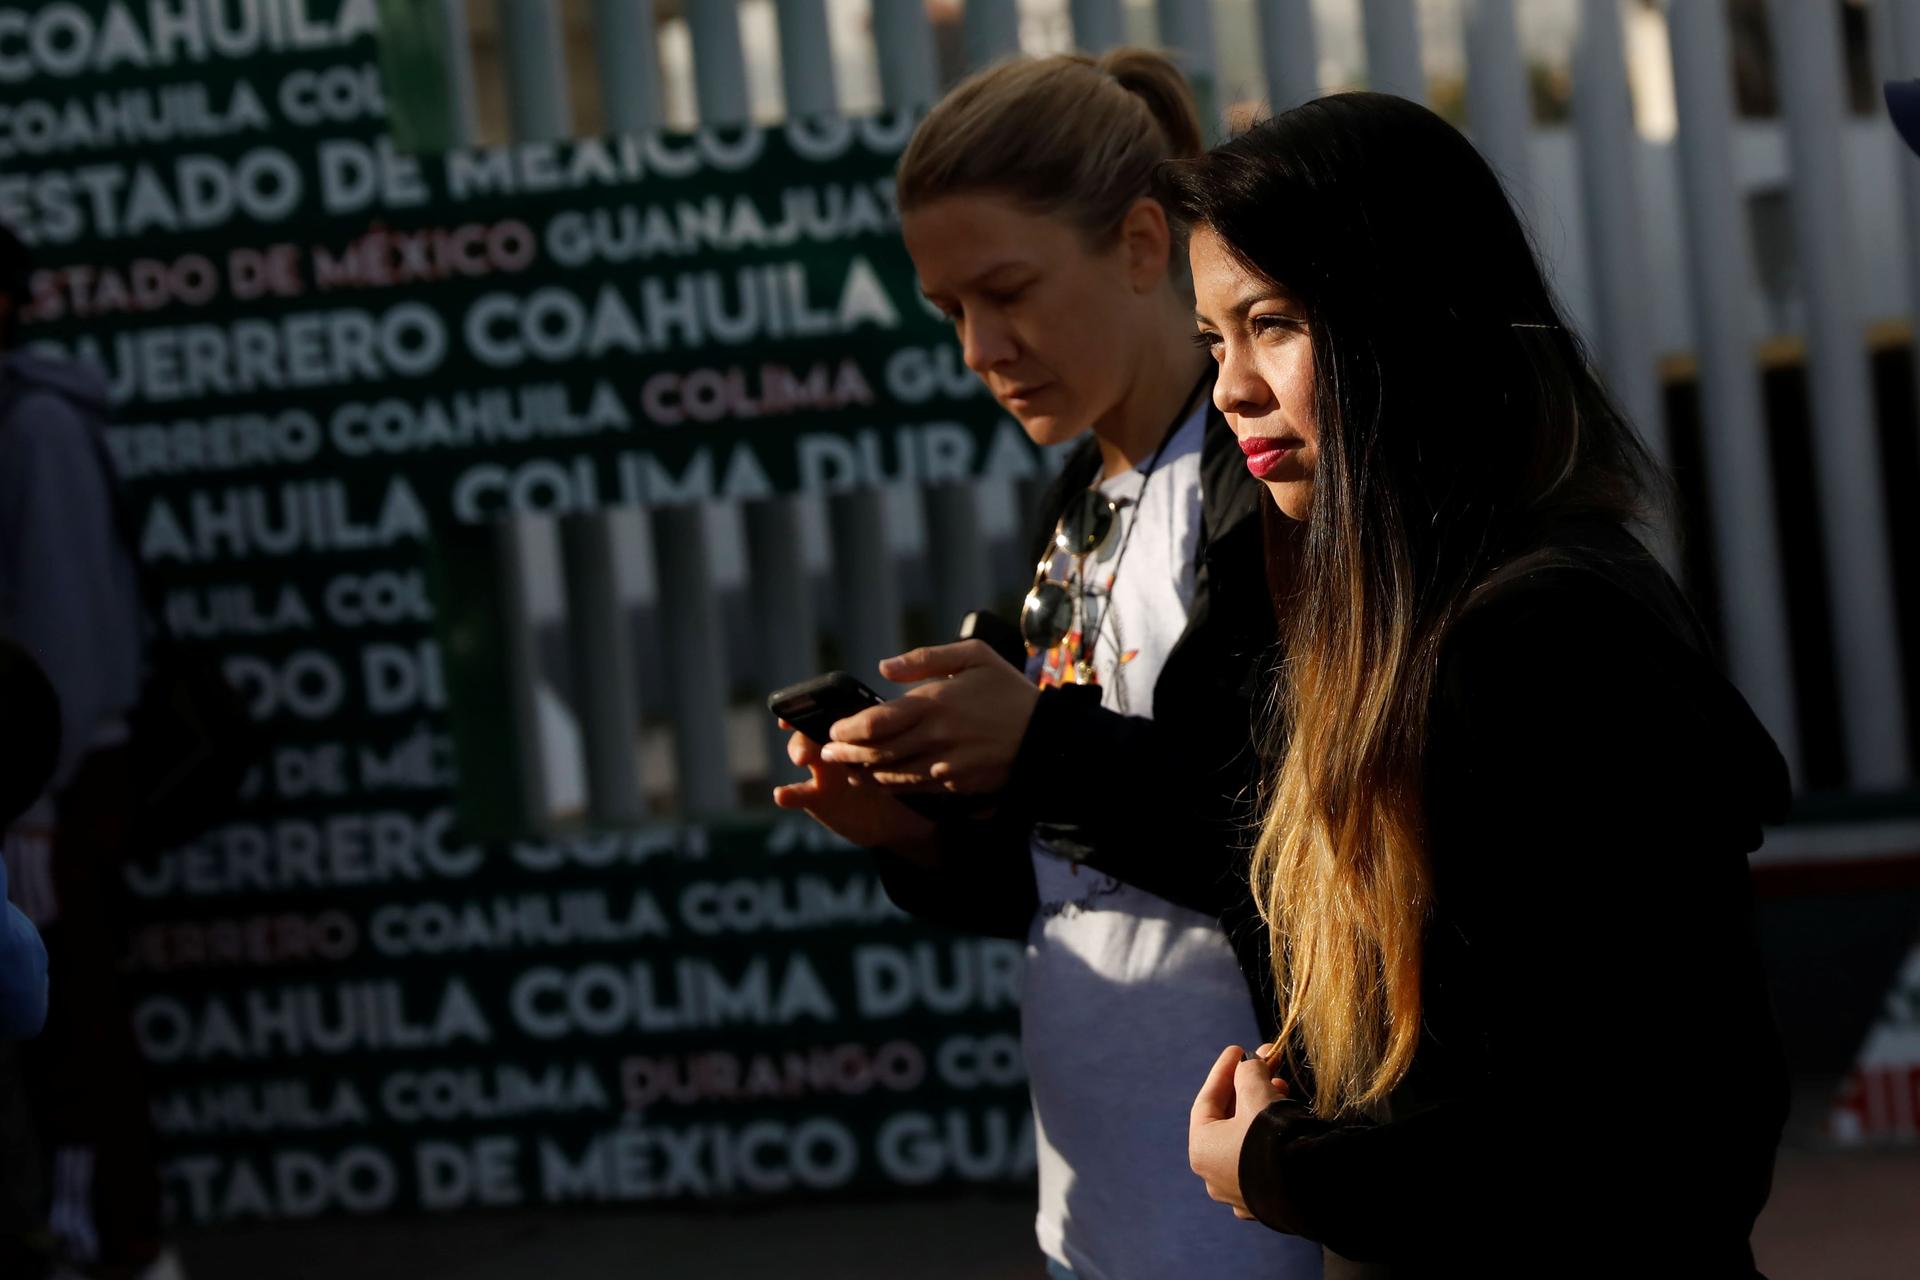 Two women wait at the Chaparral border crossing in Tijuana, Mexico.